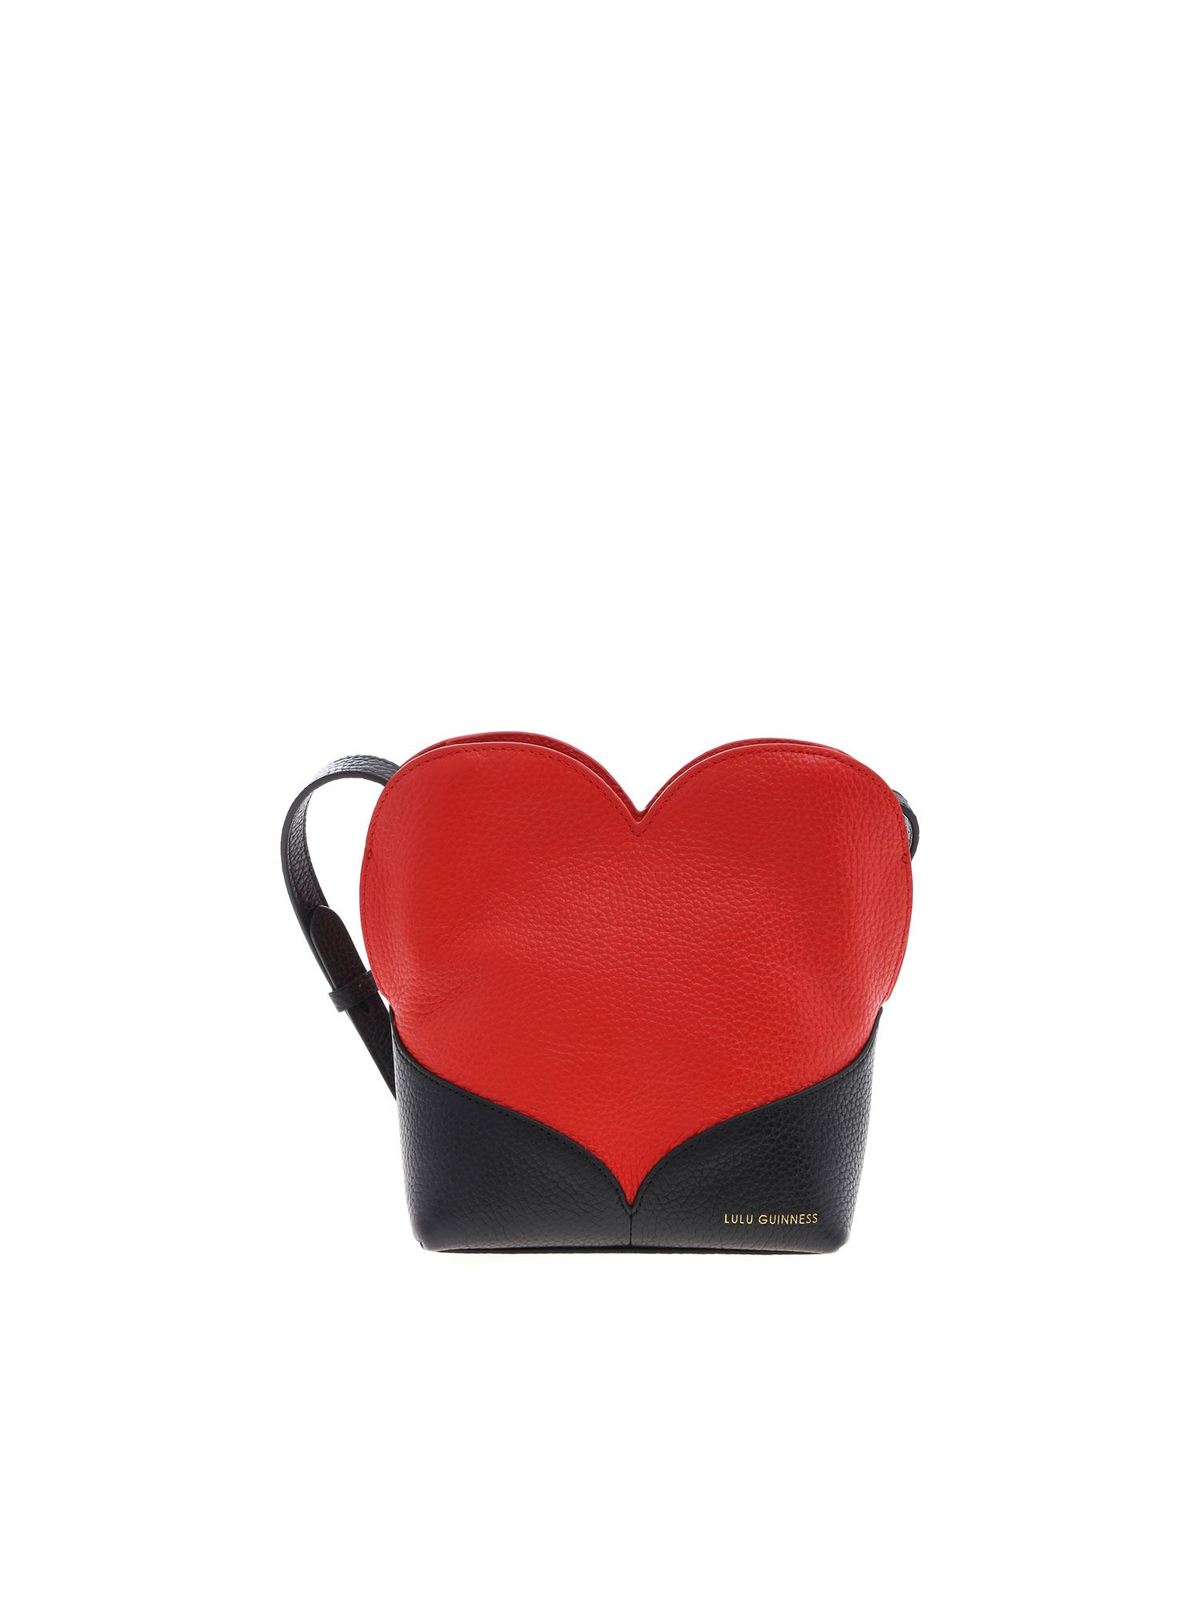 LULU GUINNESS HARRIET BAG IN BLACK AND RED